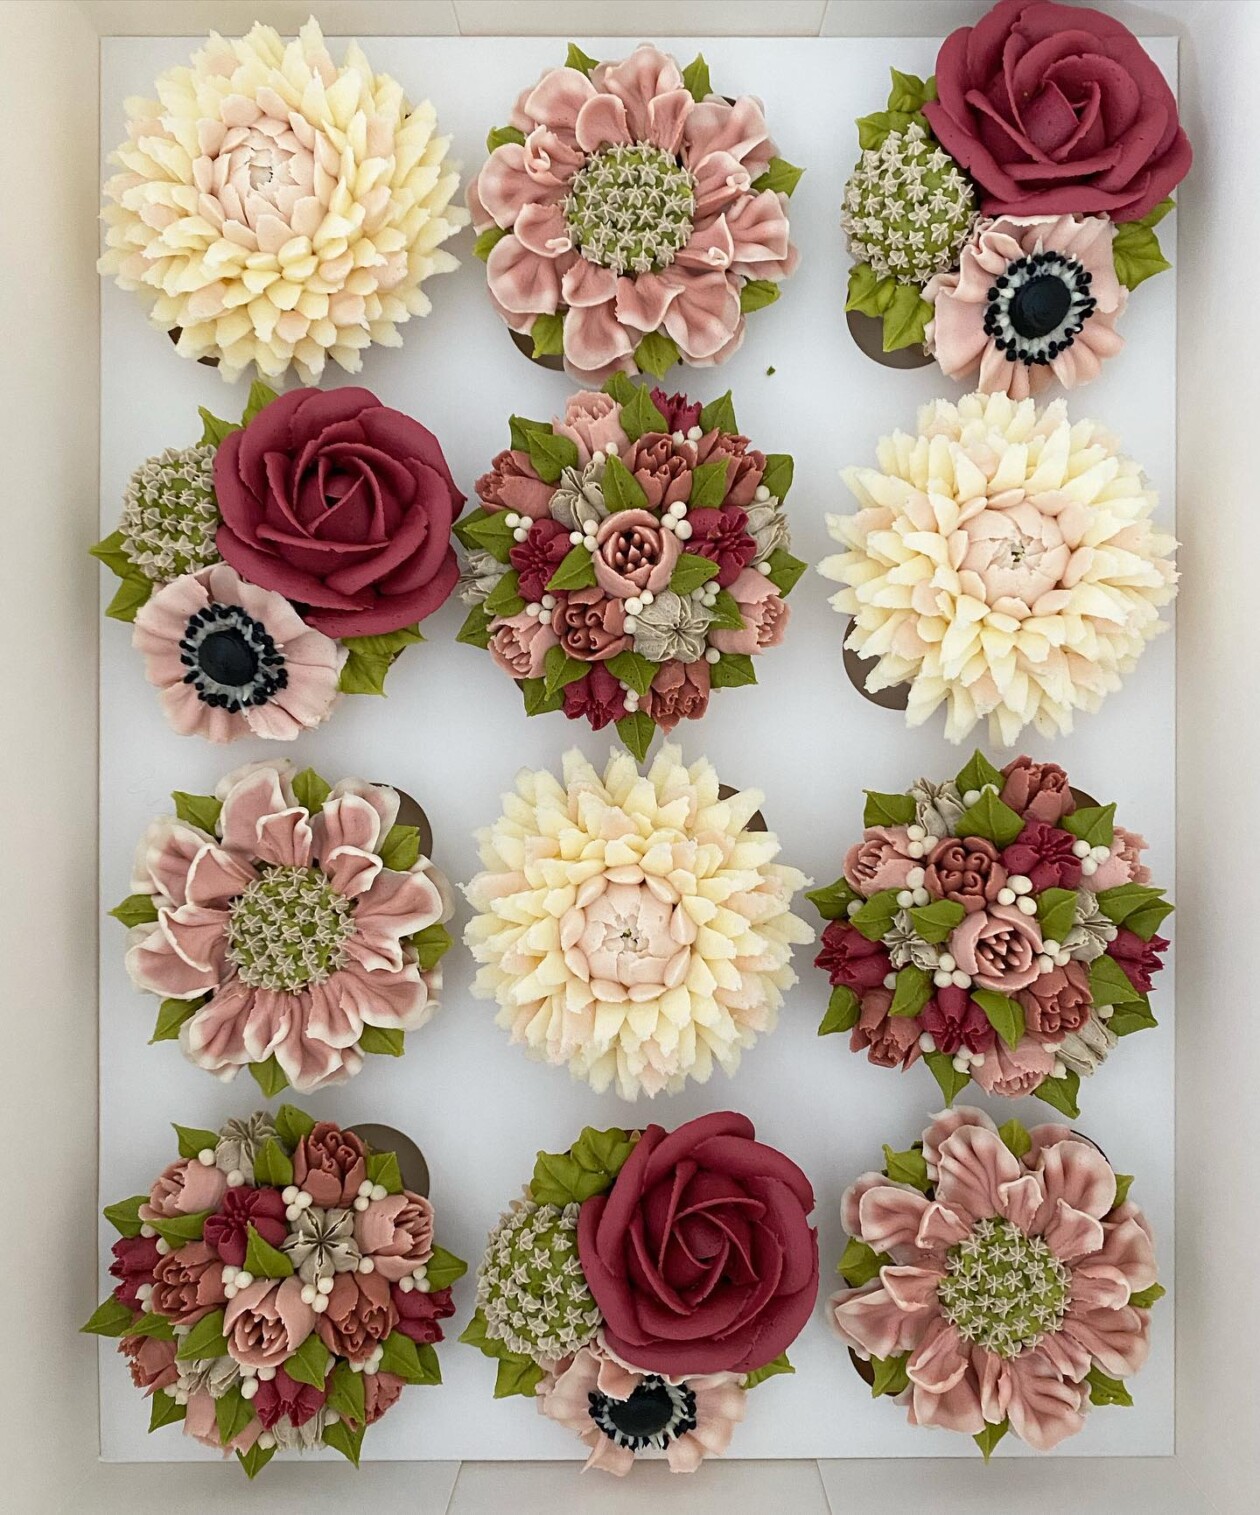 Gorgeous Cupcakes Decorated With Buttercream Flowers And Succulents By Kerry's Bouqcakes (11)